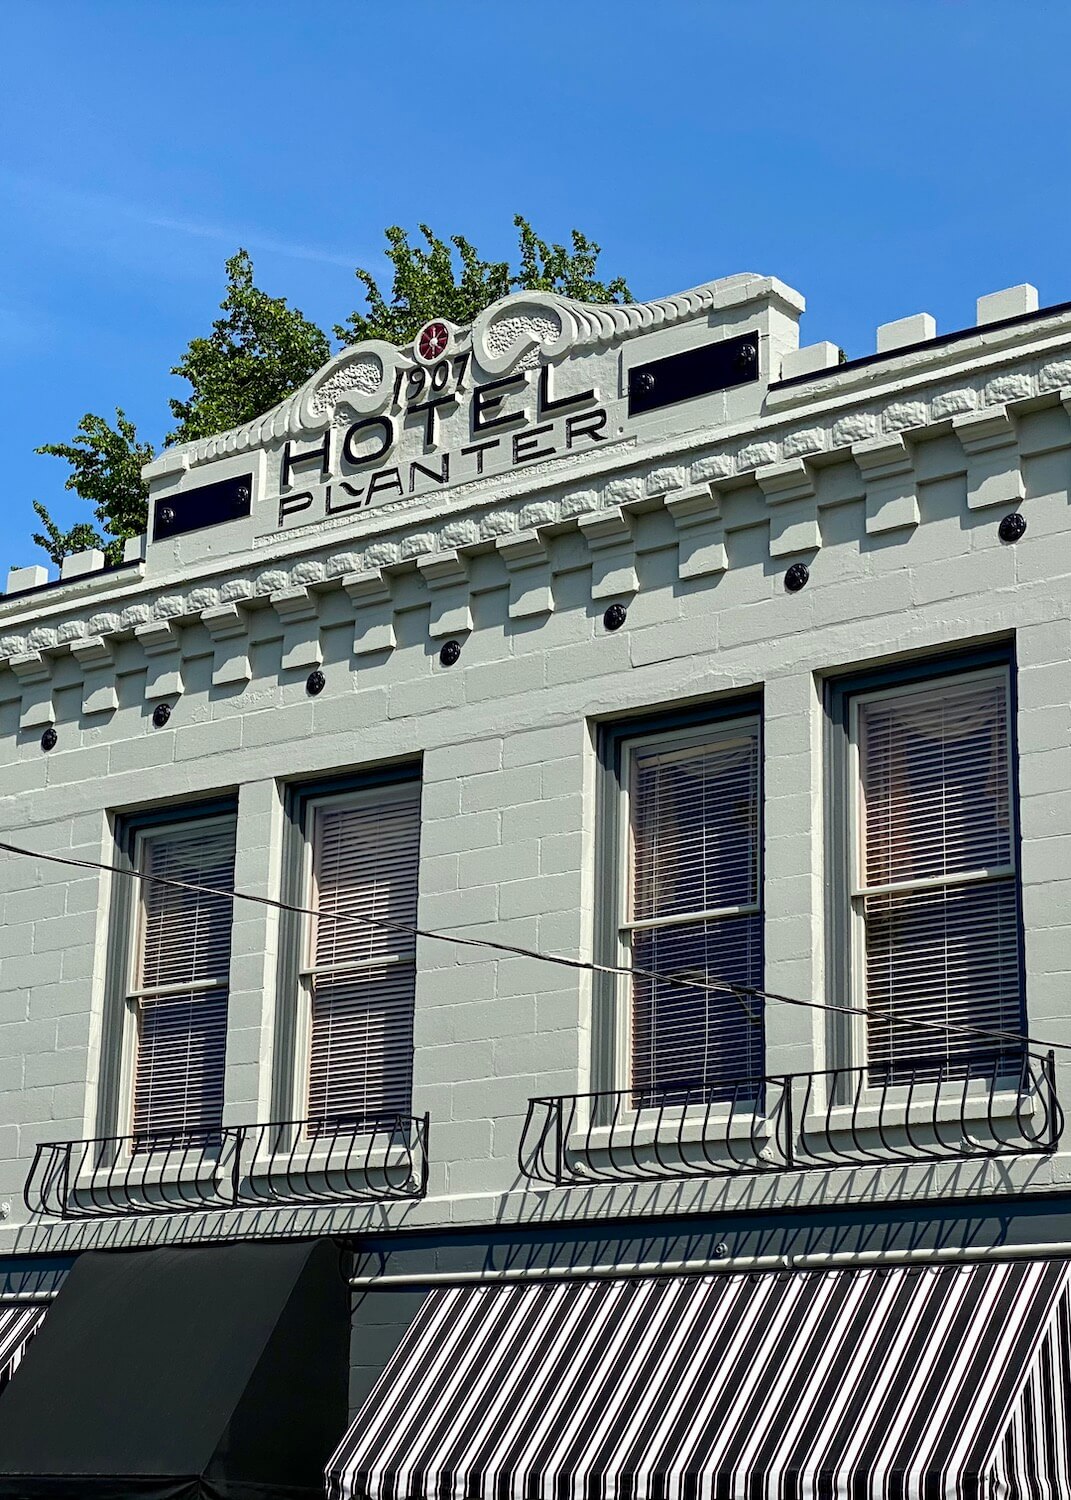 Hotel Planter, in downtown La Conner, Washington is a historic hotel that was built in 1907.  The facade is an olive green with black trim around the windows.  The sky above is blue and there is a green leafy tree above the cornice of the hotel. Covering a window on the first floor is an awning with black and white stripes. 